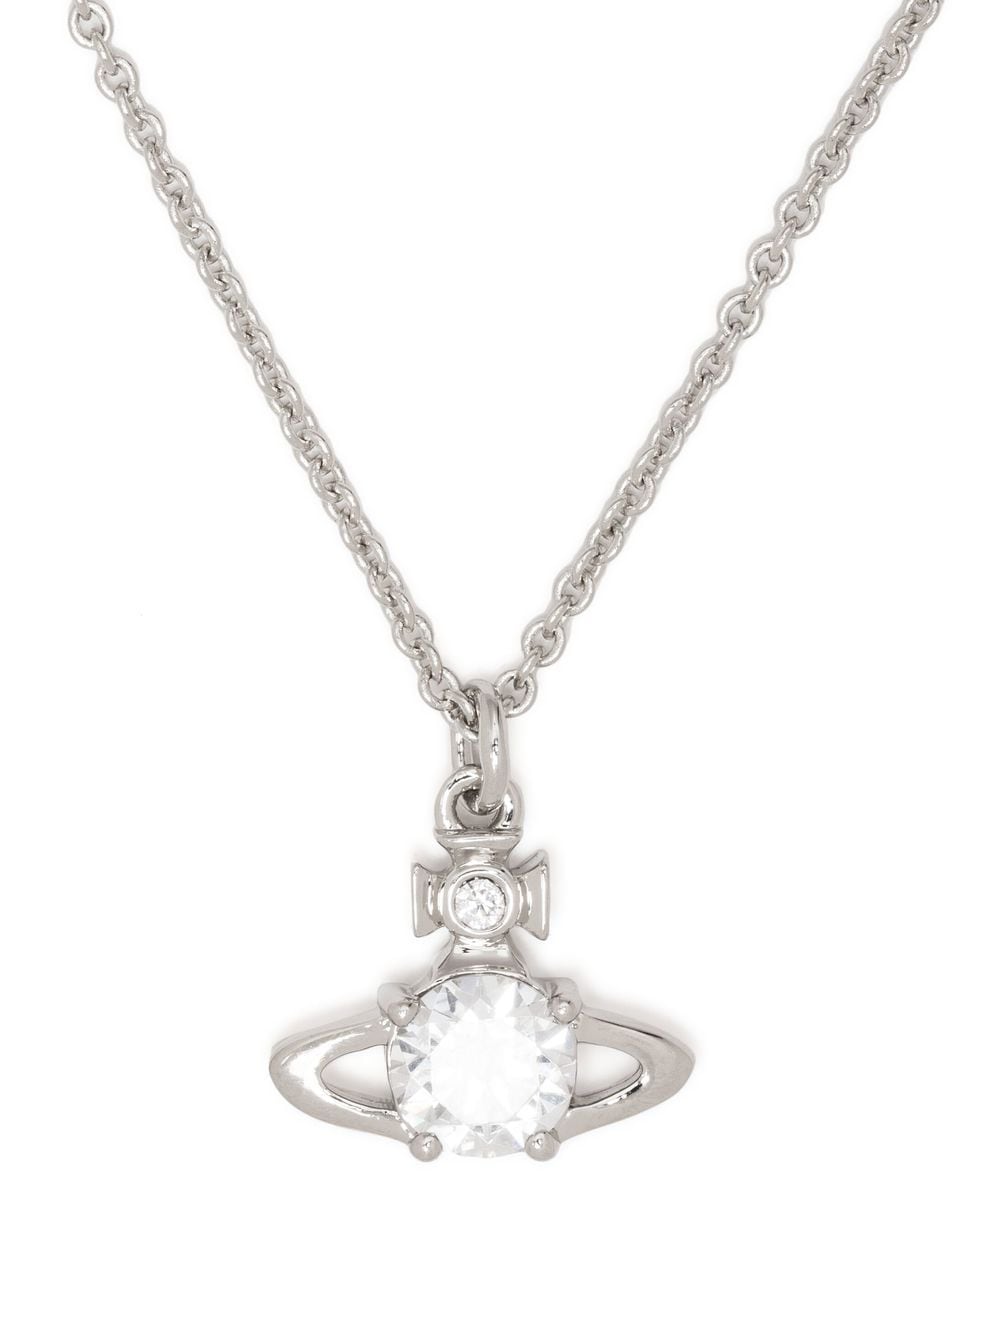 New Small Orb Pendant Necklace in PLATINUM